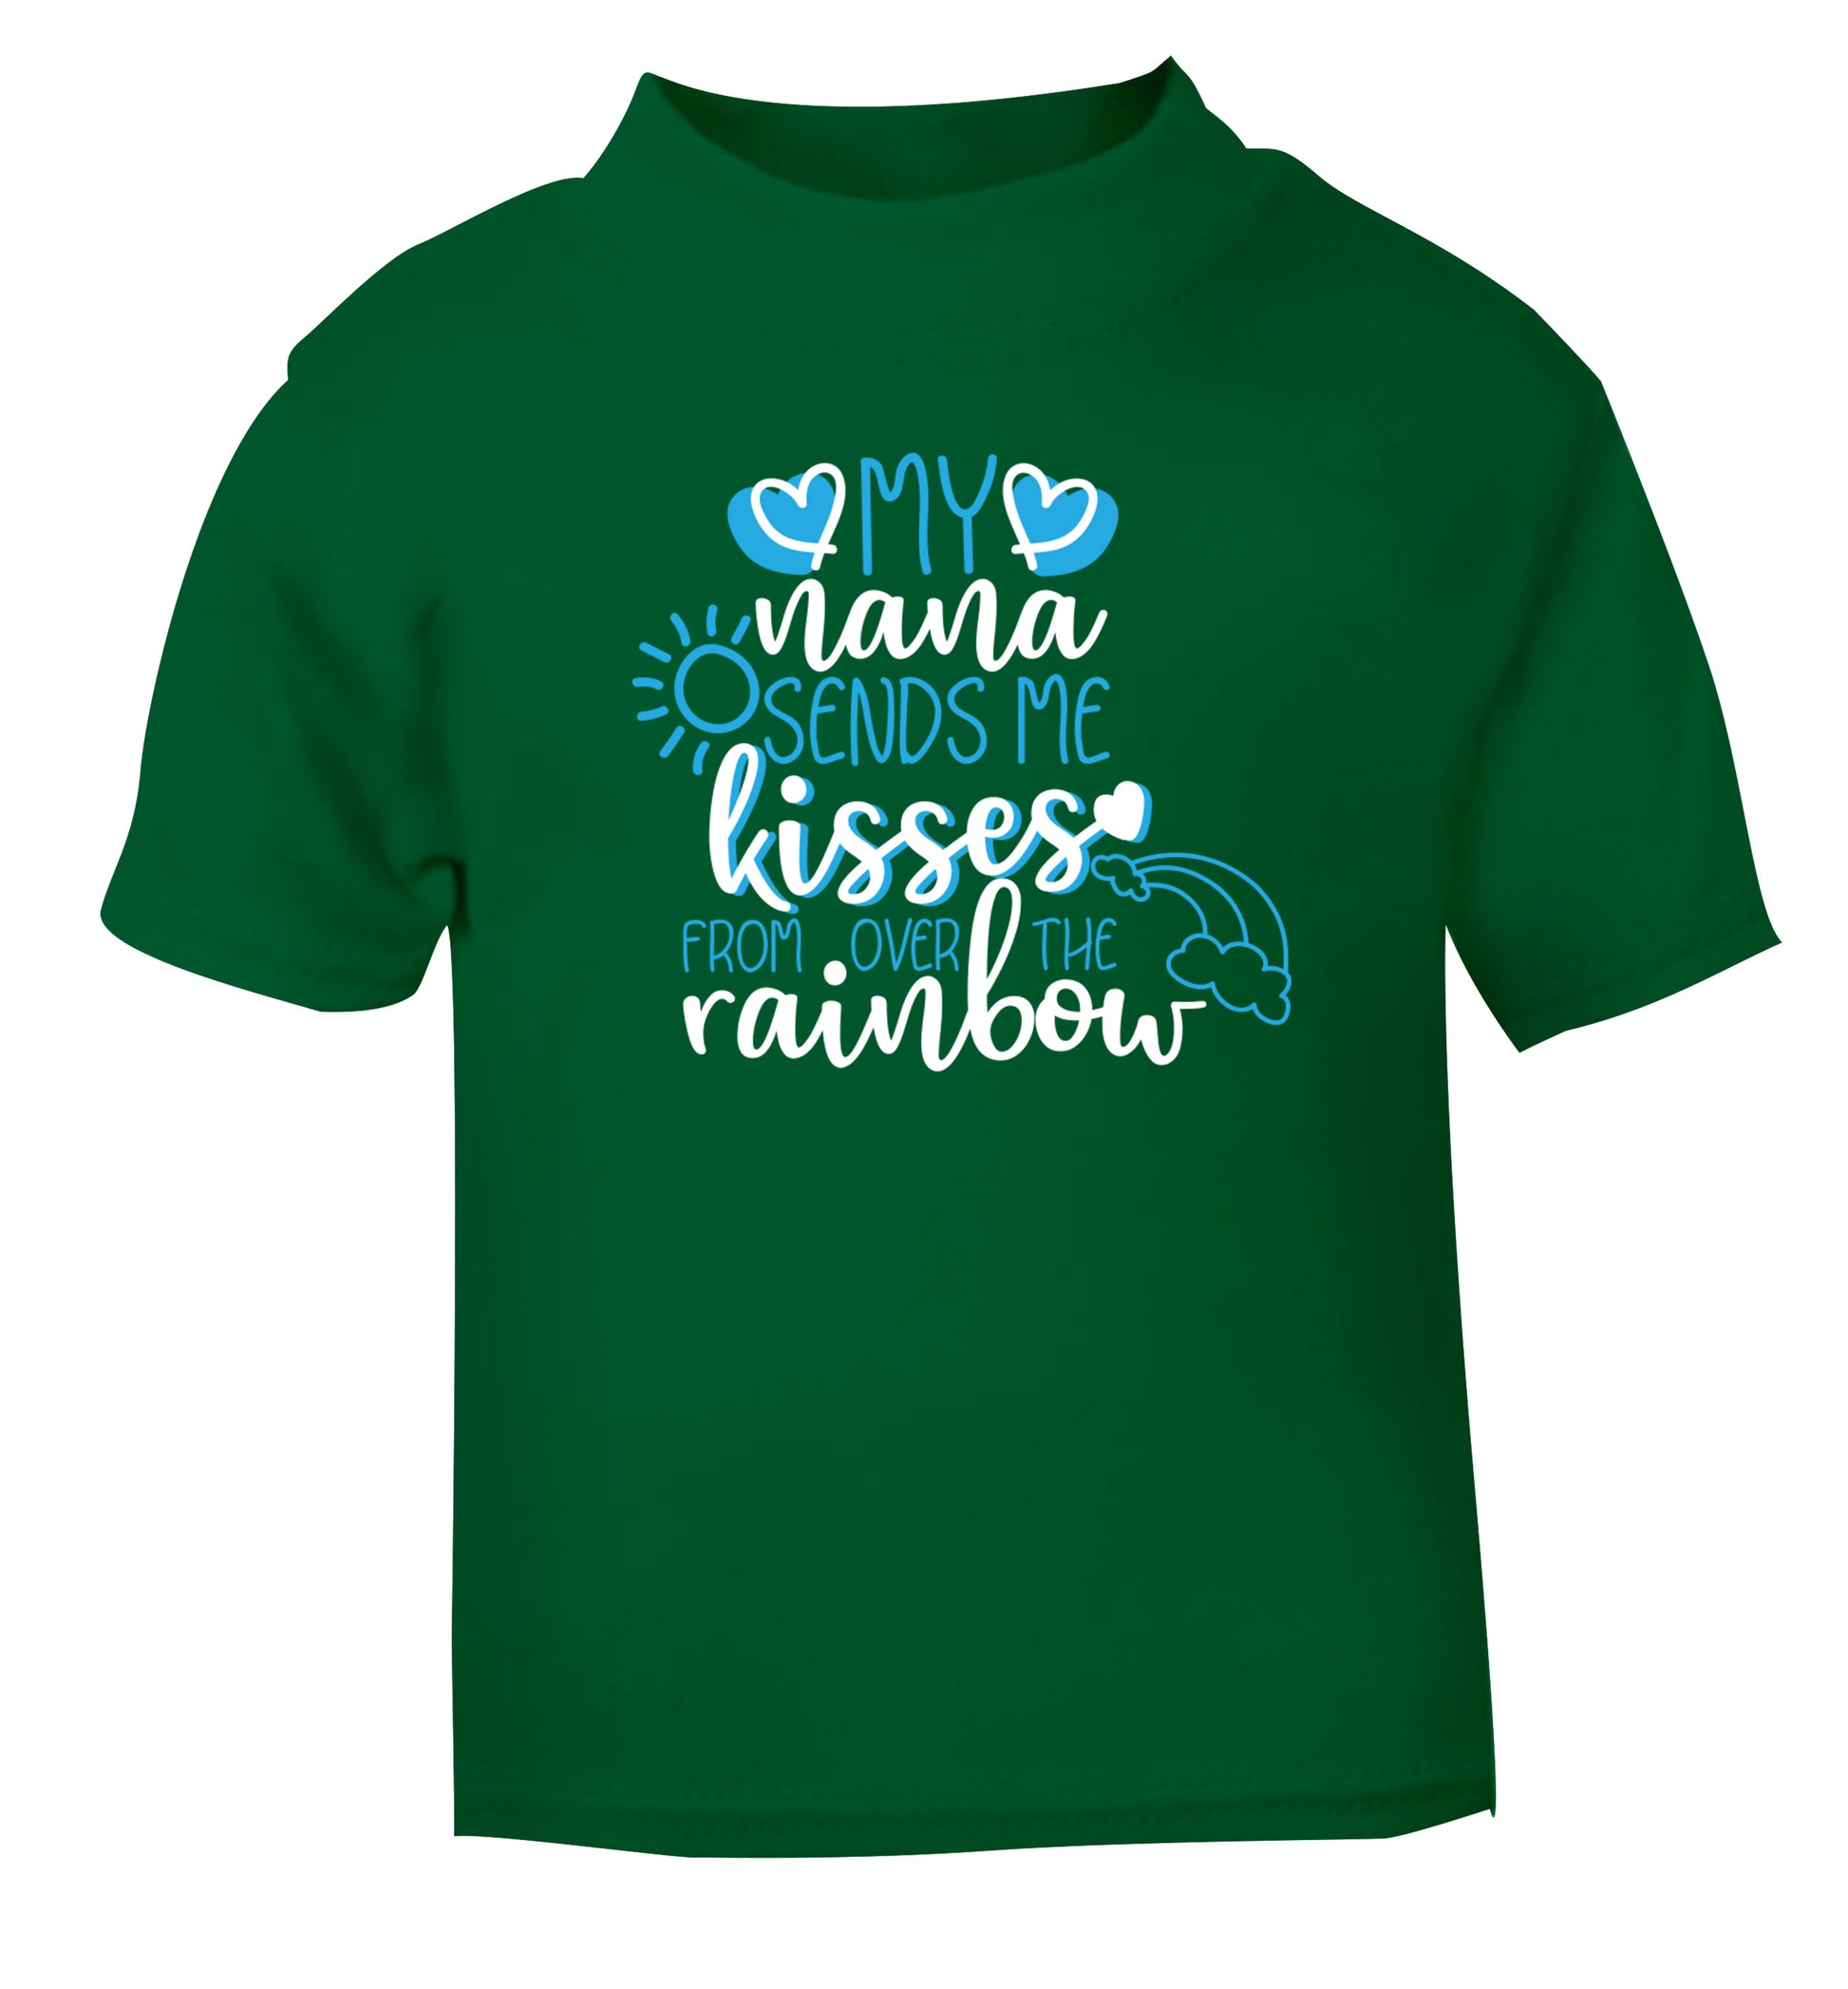 My nana sends me kisses from over the rainbow green Baby Toddler Tshirt 2 Years